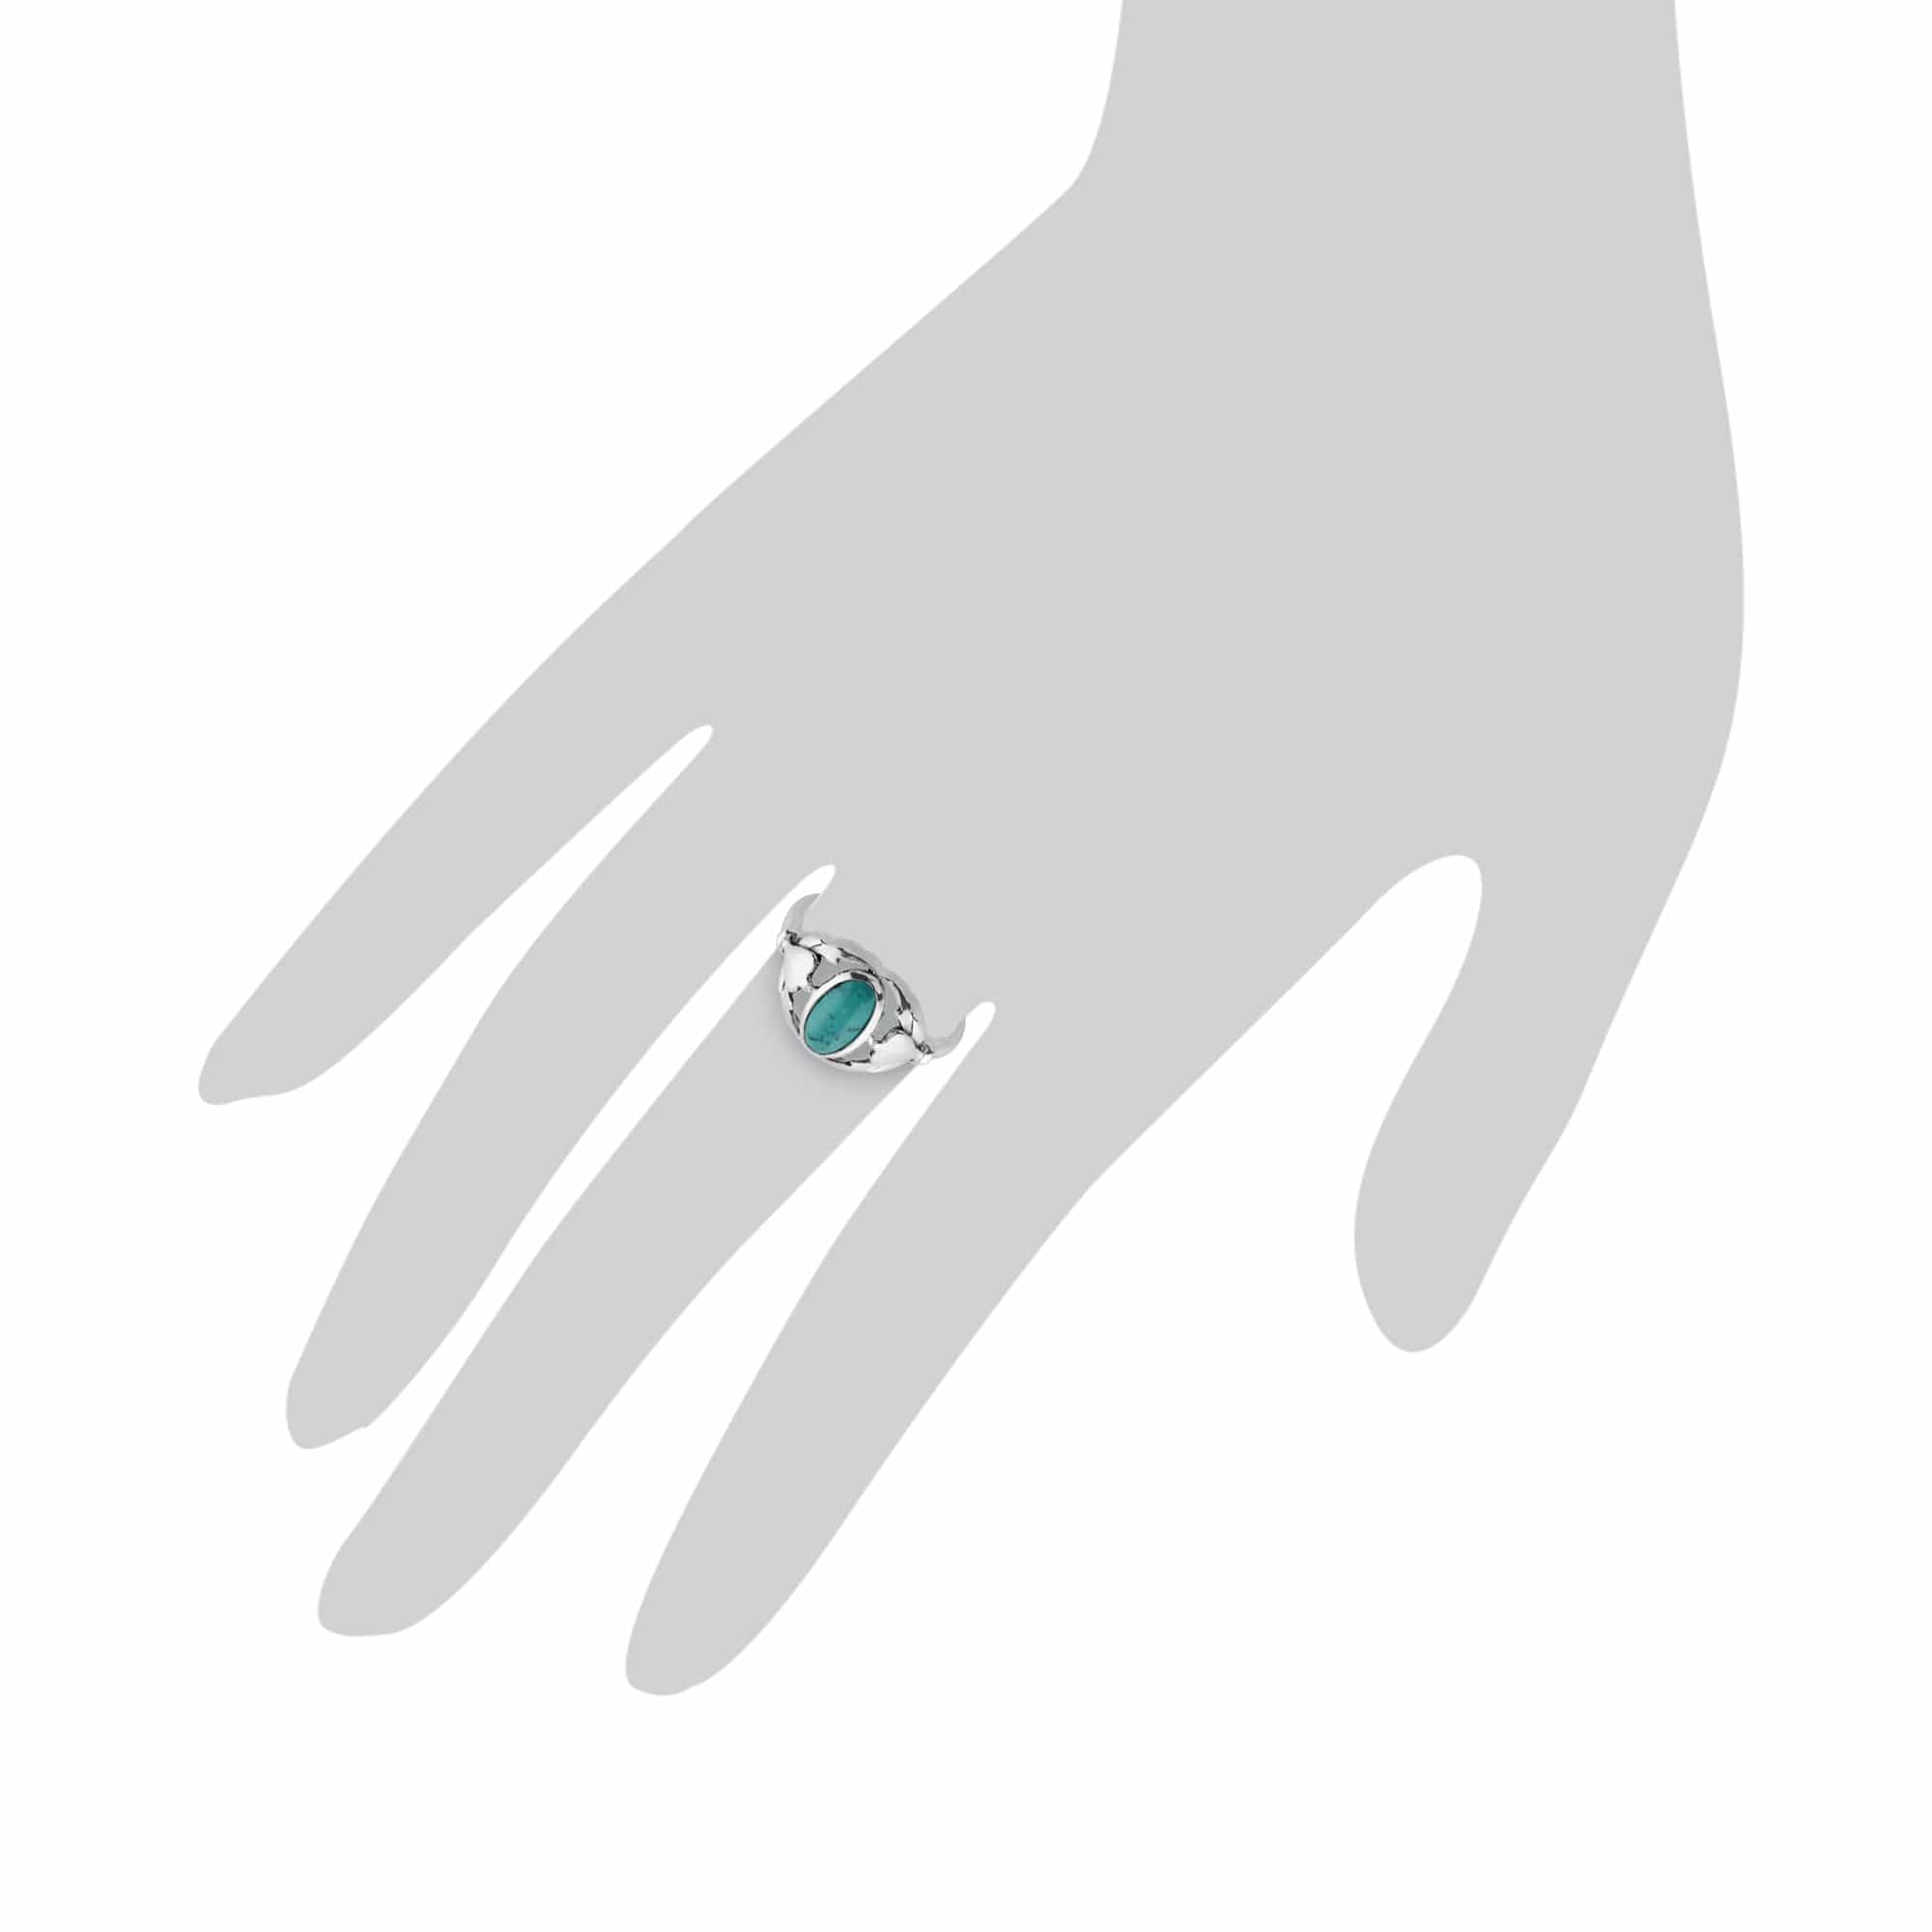 Gemondo 925 Sterling Silver 0.77ct Turquoise Ring Image 3